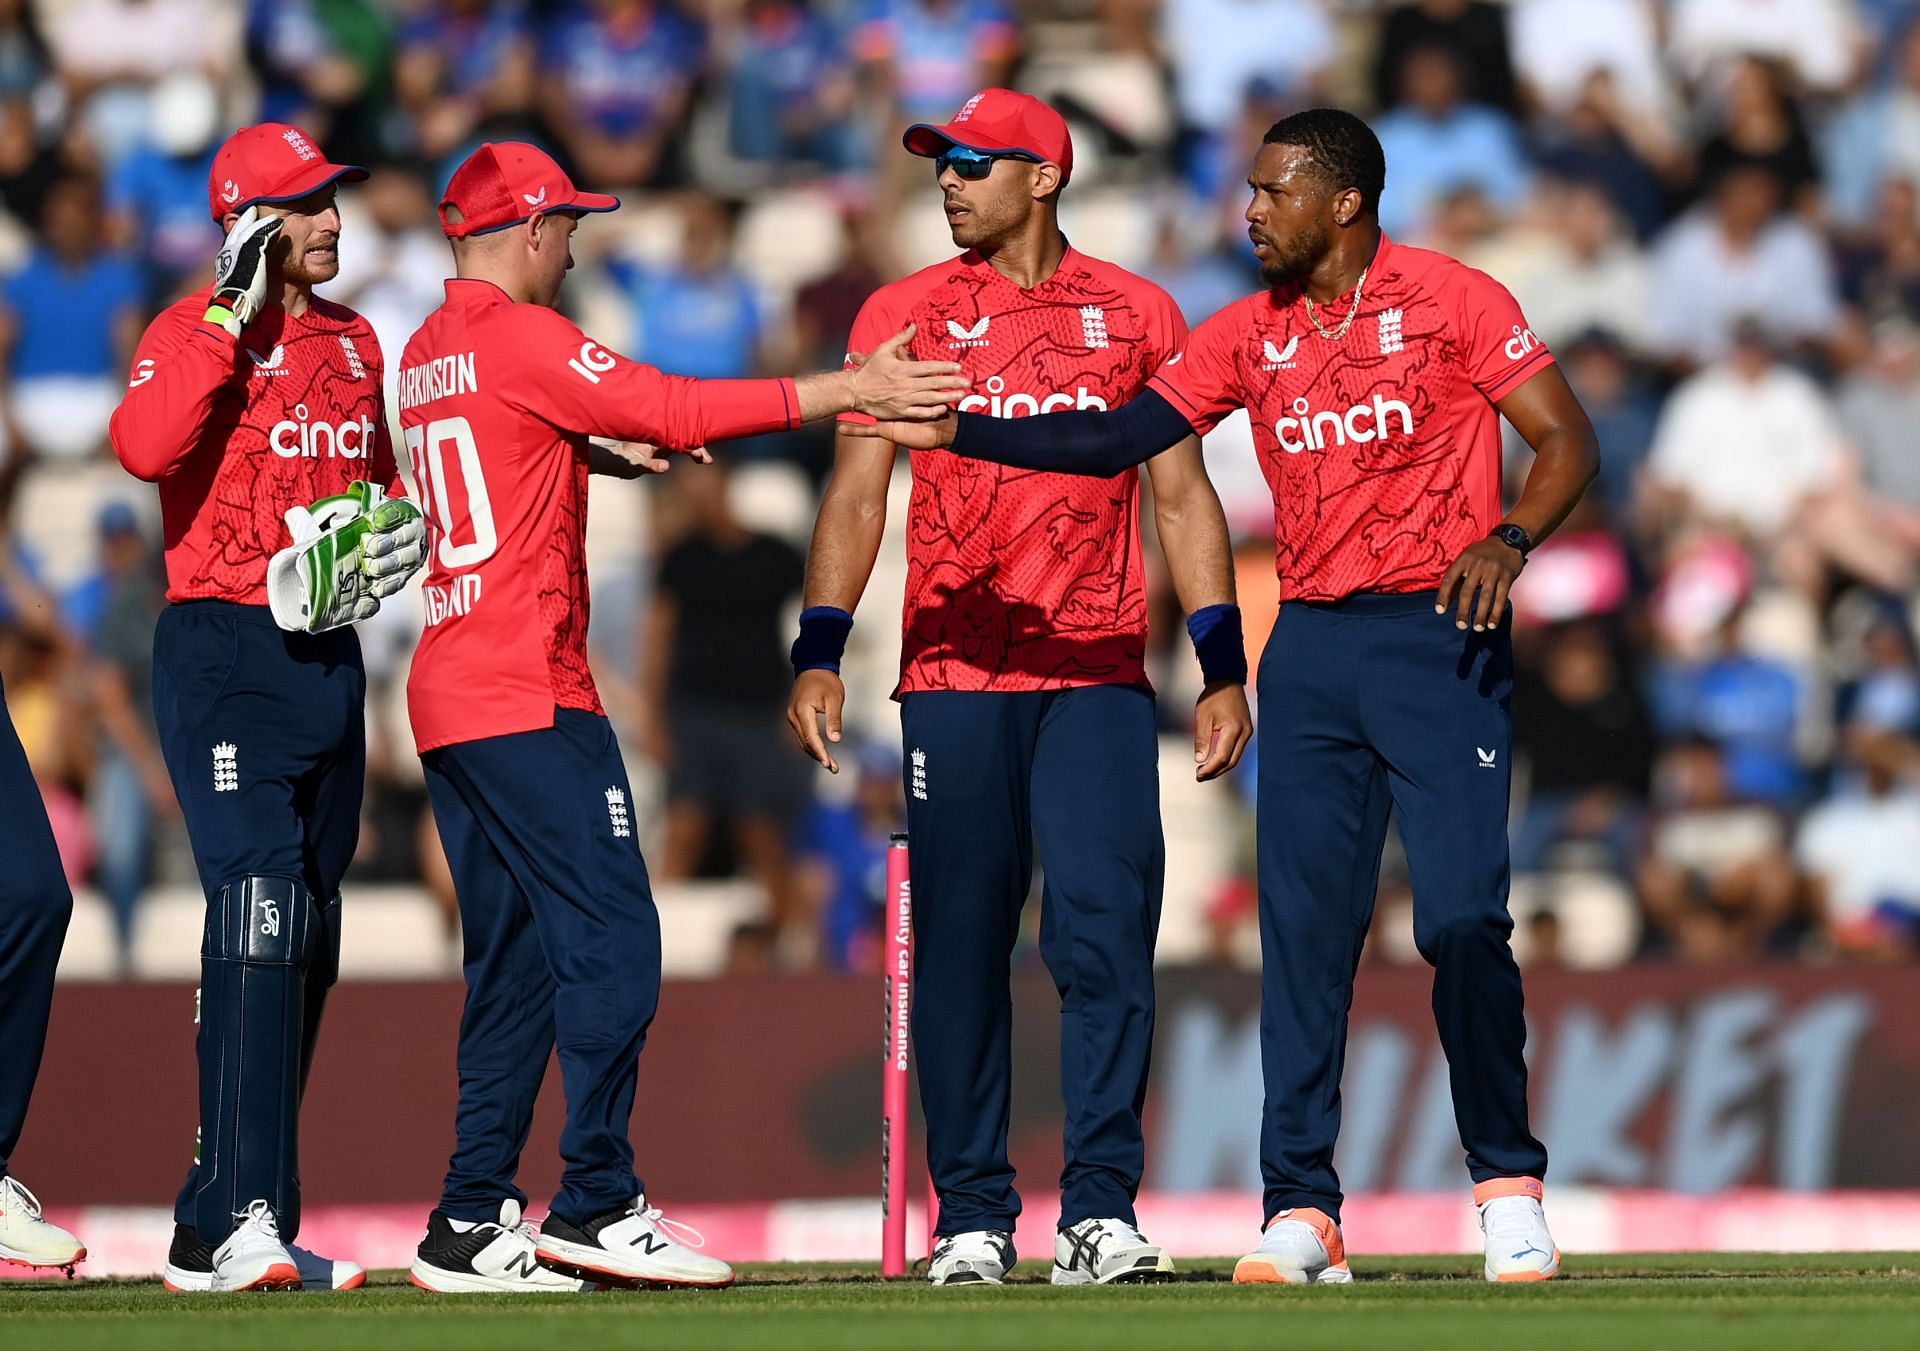 The England bowlers were taken to the cleaners by the Indian batters in the first T20I